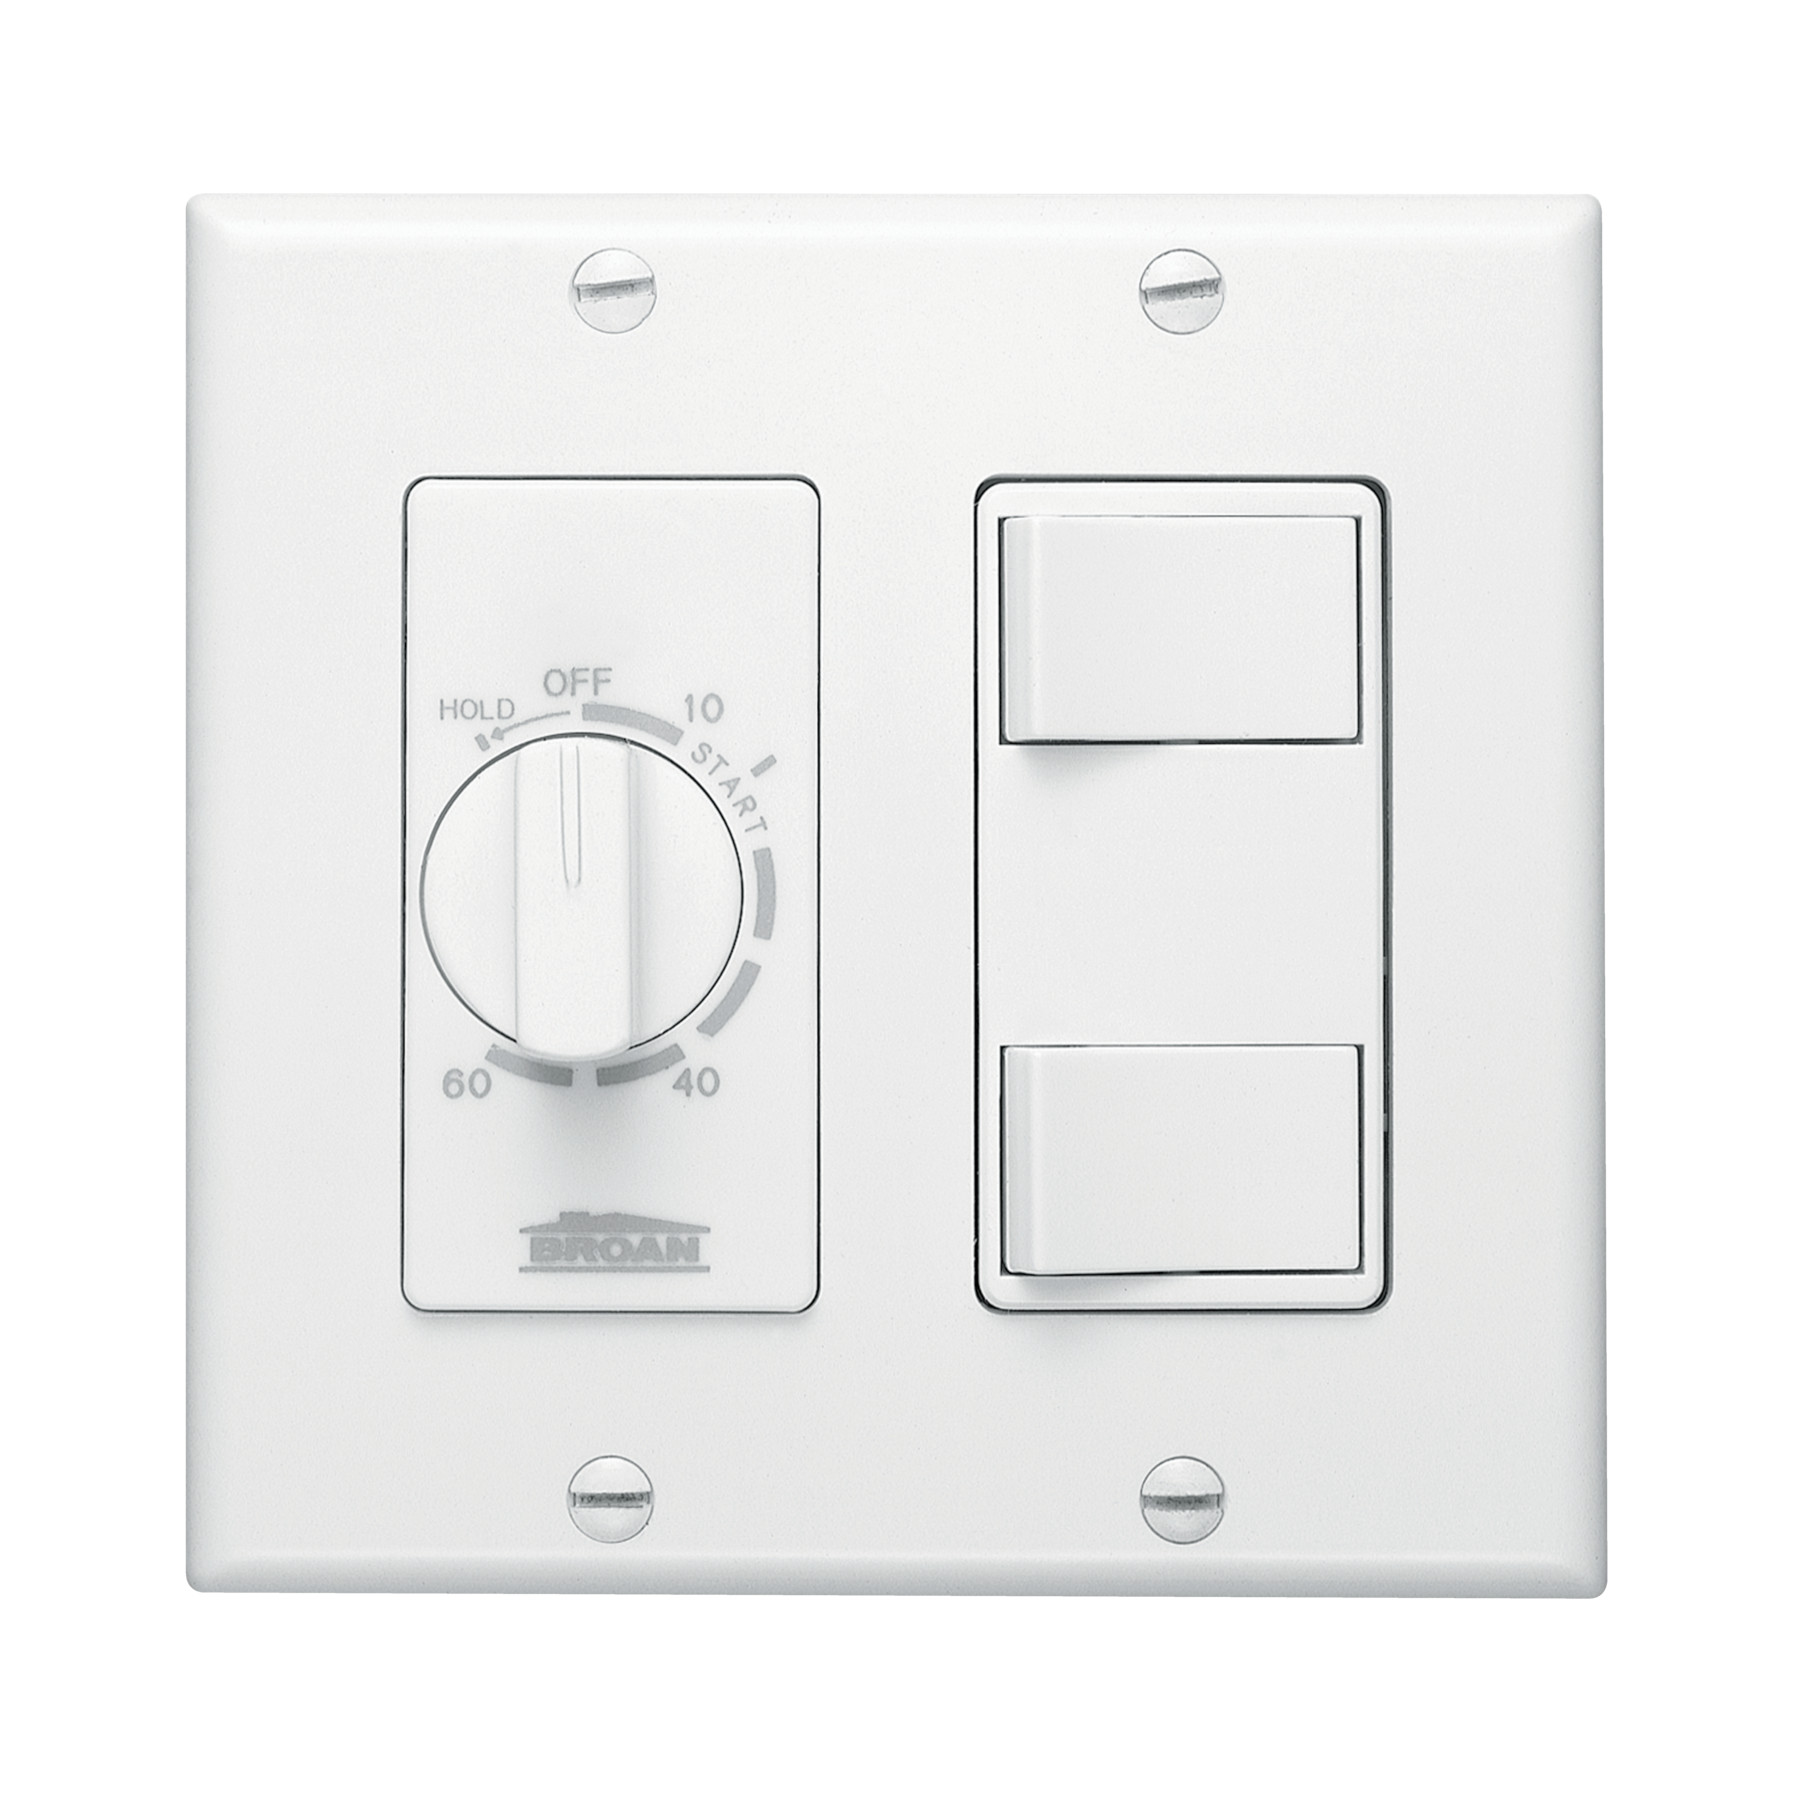 Broan-NuTone® 60-Minute Time Control w/ 2-Rocker Switches, White